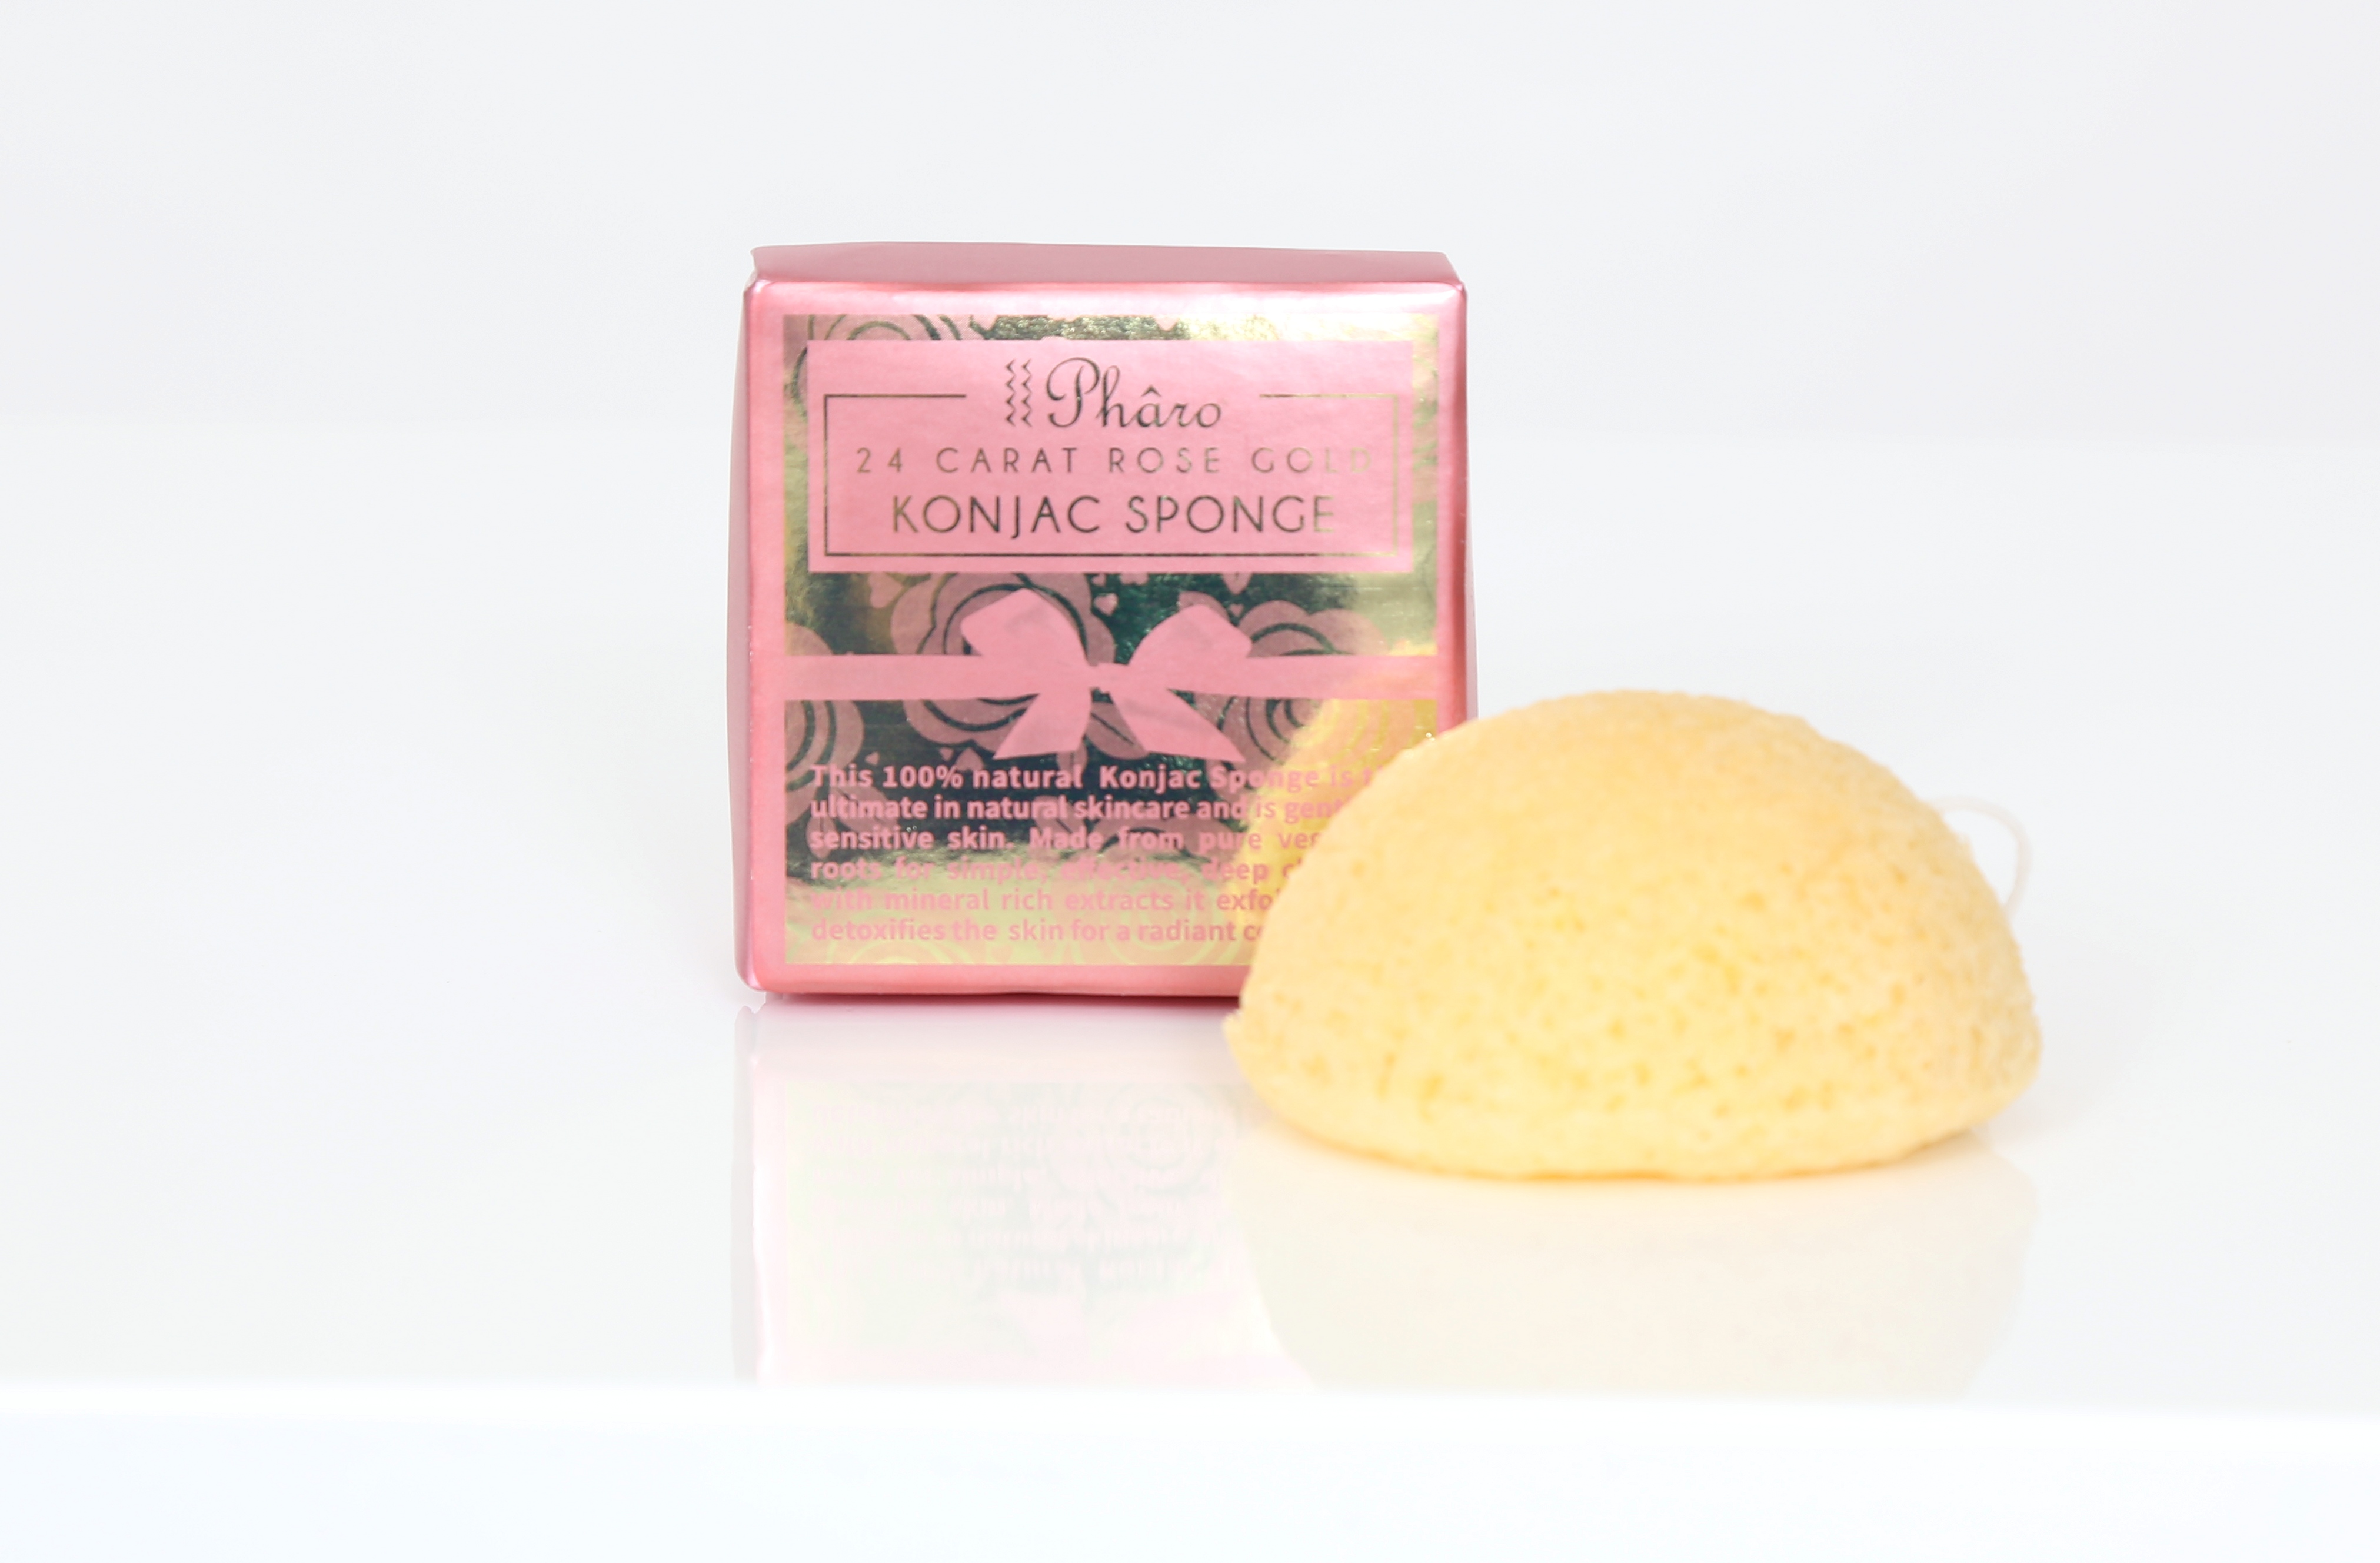 The all natural Konjac sponge used to gently wipe away the gold